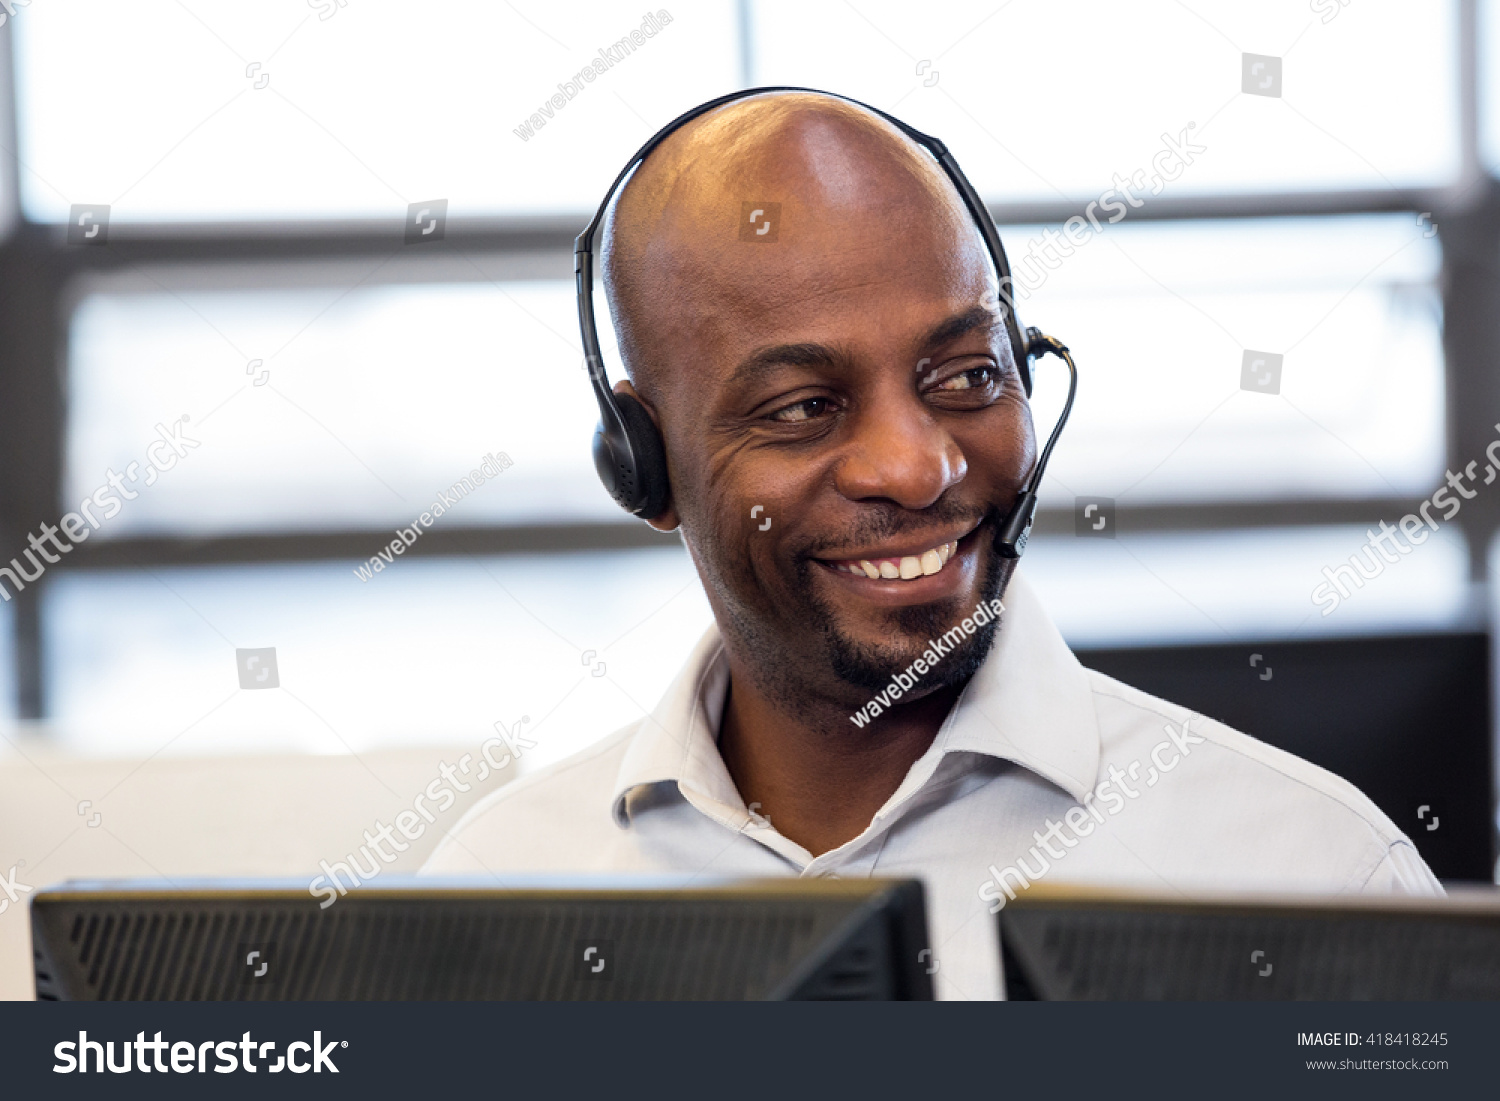 Man working on computer with headset in office #418418245